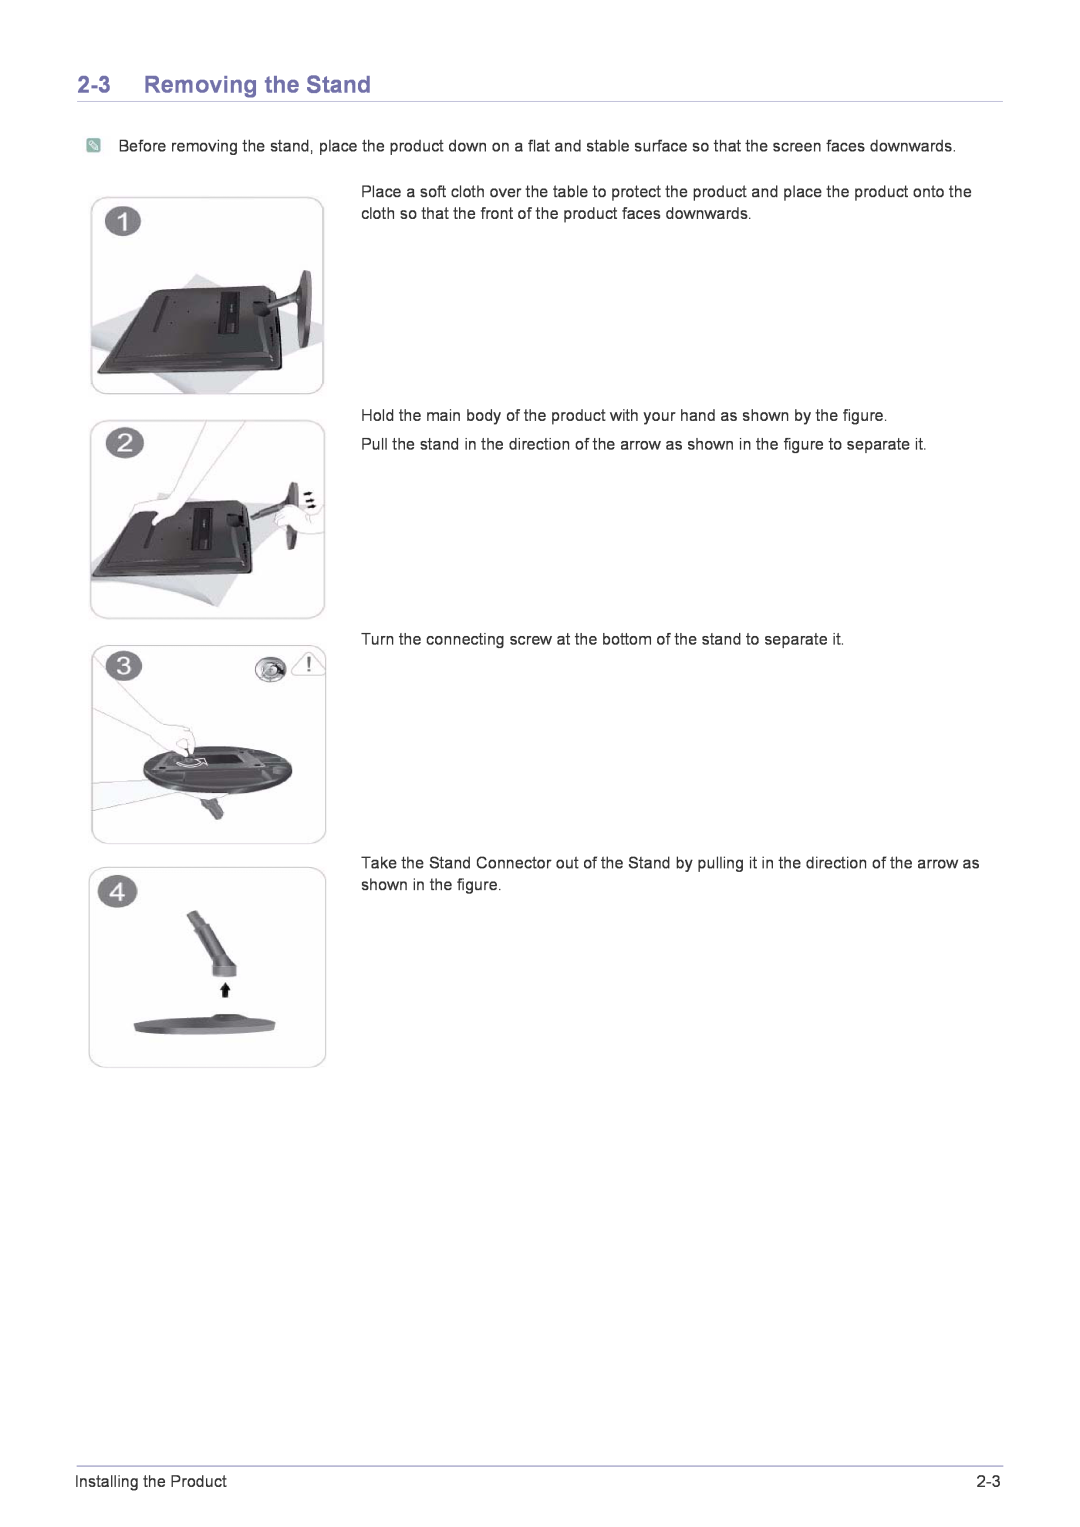 Samsung B2330, B2430L, B1930NW, B1730NW, B1630N, B2230W, B2230N, B2030N user manual Removing the Stand 